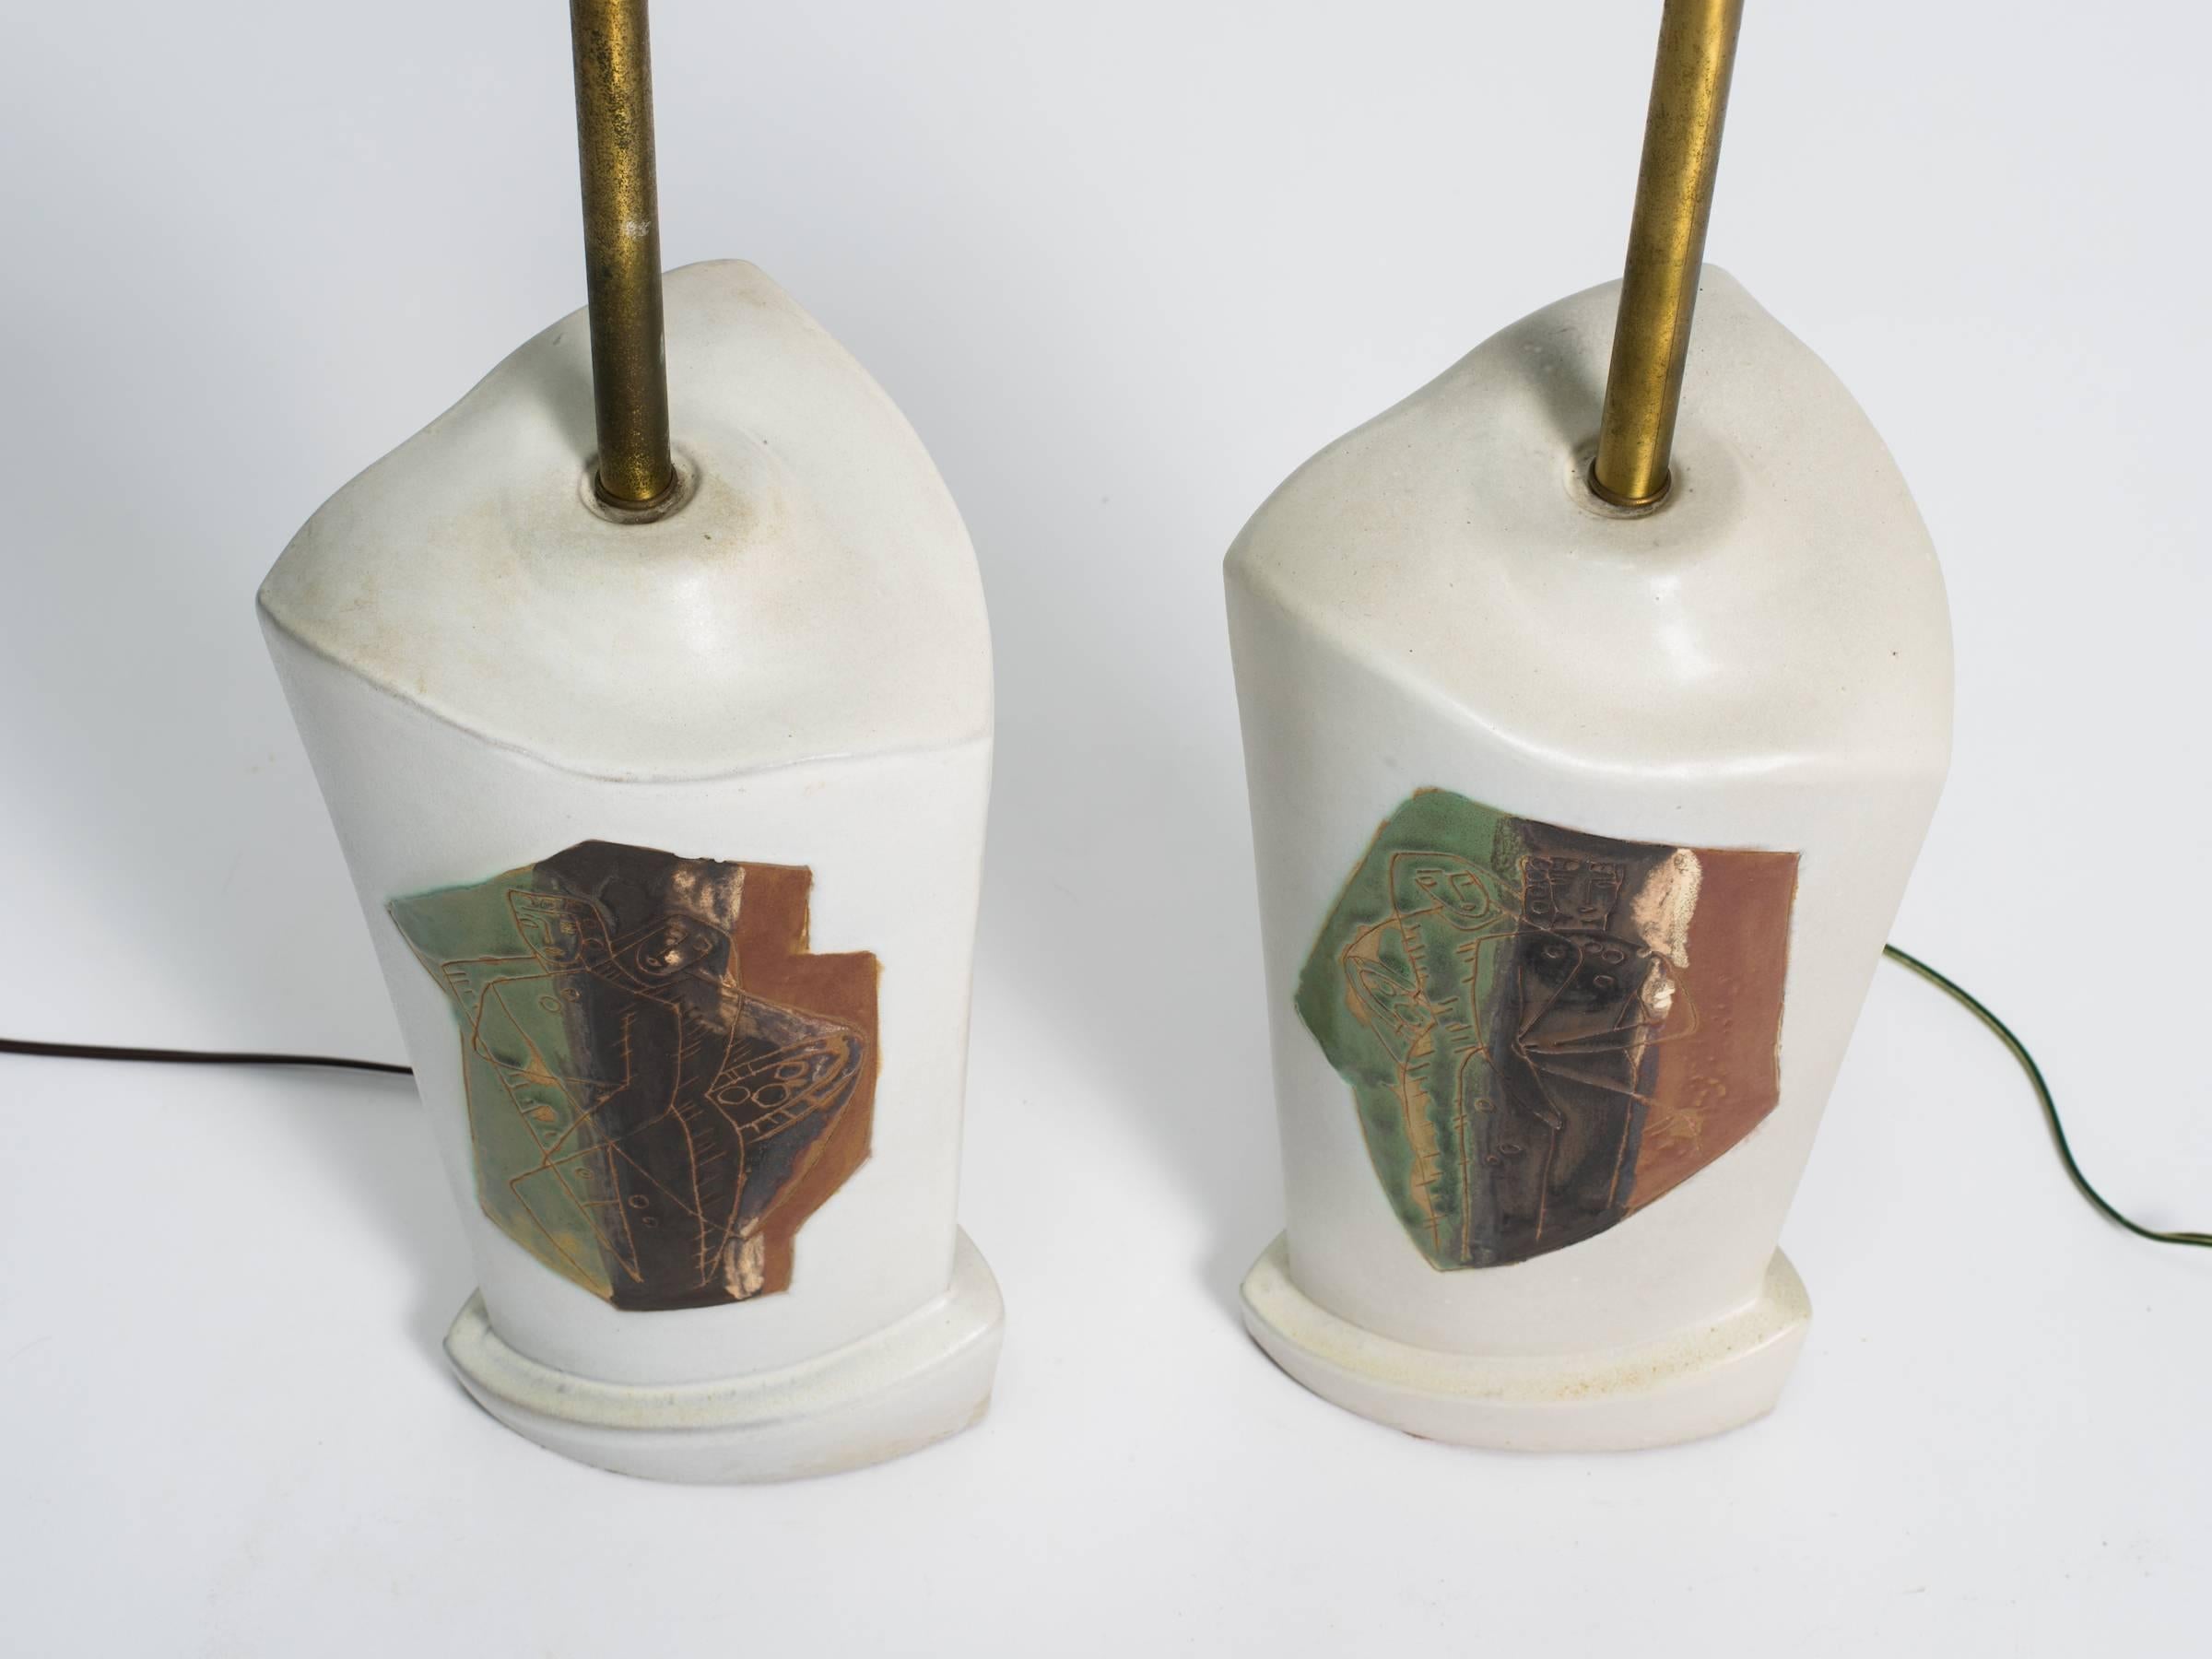 Pair of 1950s Marianna von Allesch ceramic lamps with abstract figurative design.

Measurements are to the top of the socket.